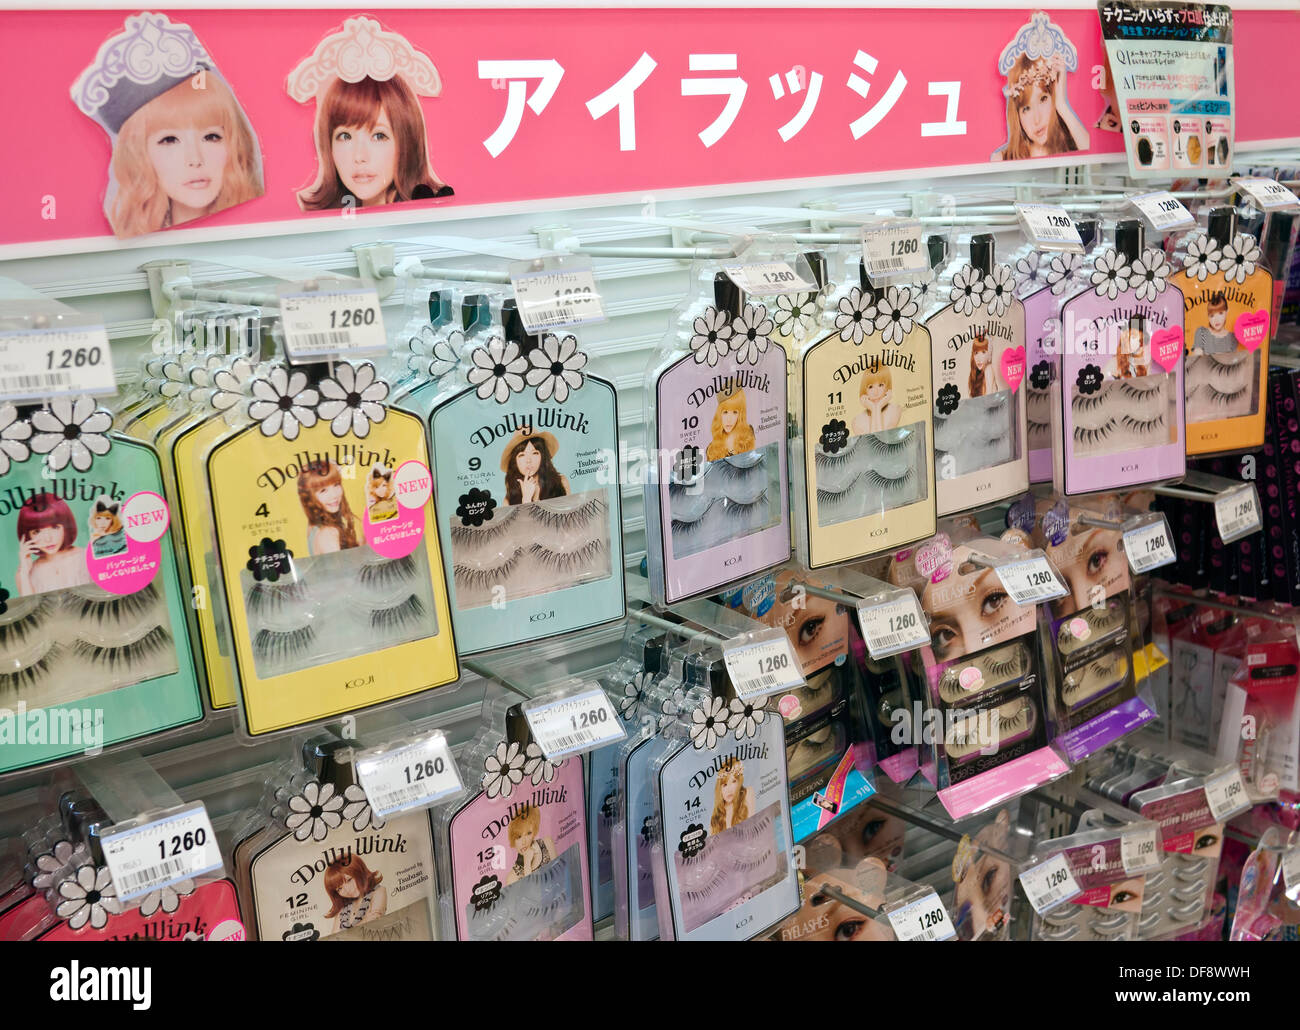 Retail display of ladies Japanese cosmetics and makeup in department store in Japan. Stock Photo